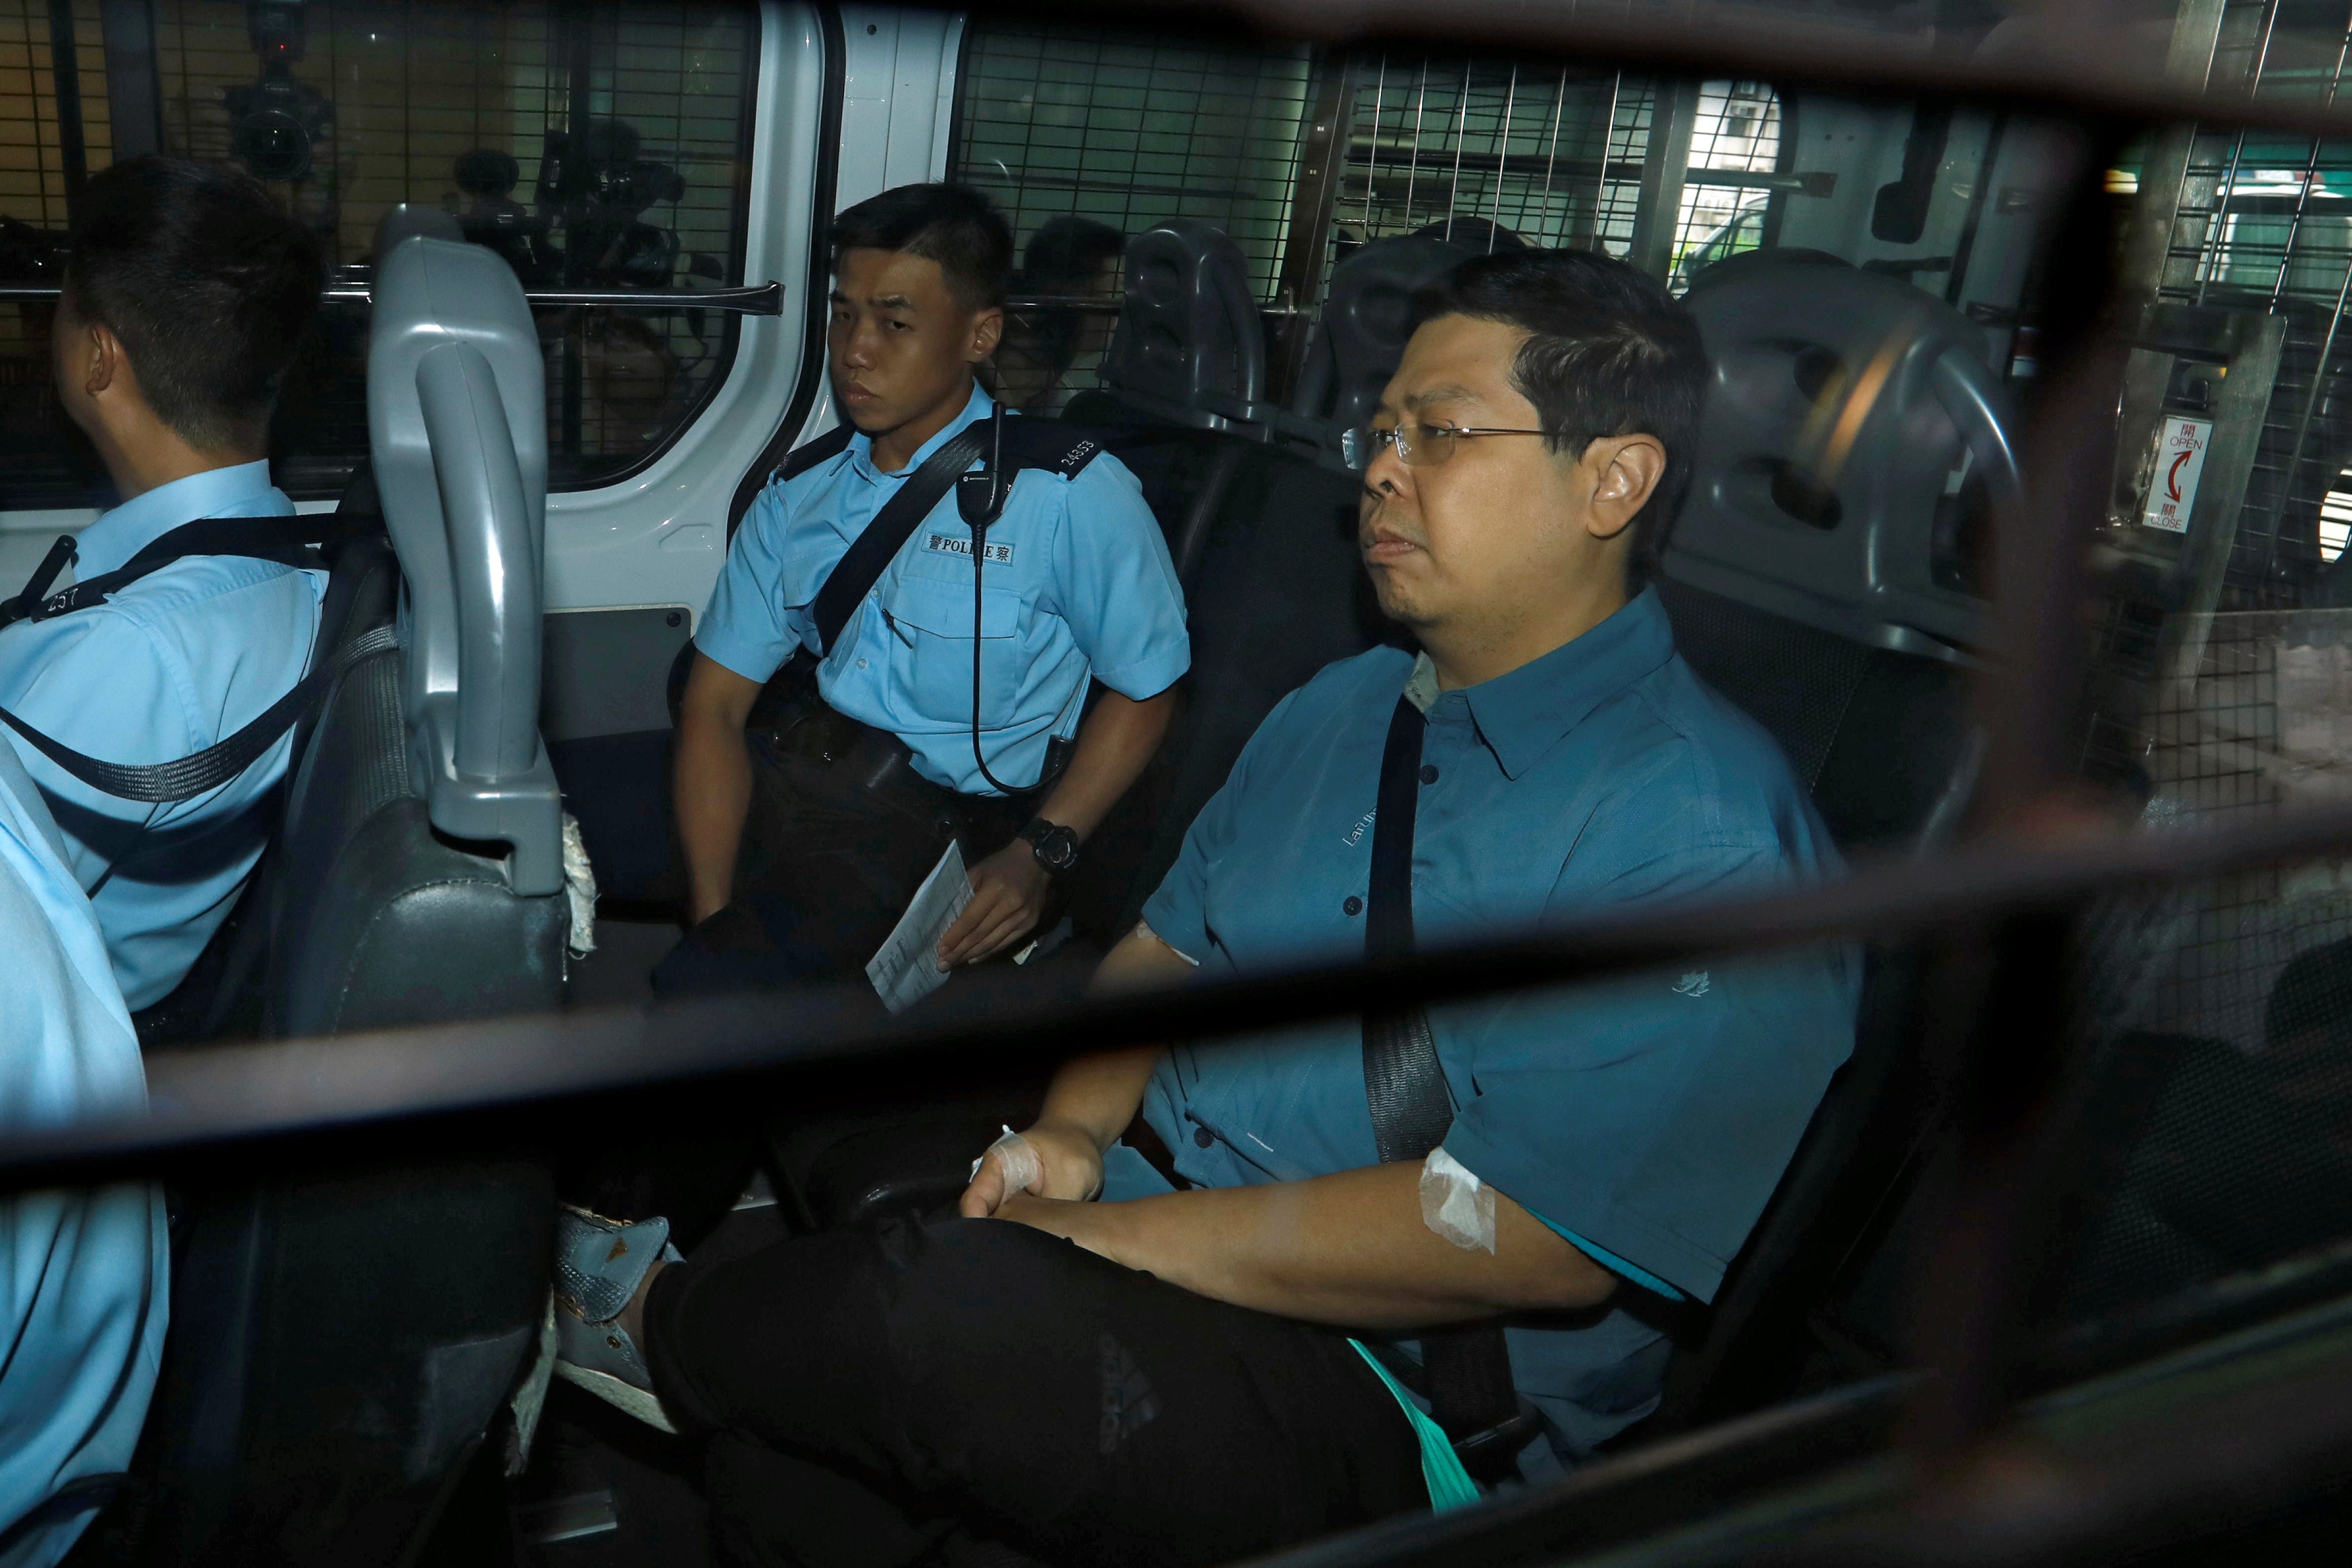 Howard Lam is brought to Kowloon City Magistrates’ Courts on August 17. Lam has been charged with misleading police over claims he was assaulted and illegally detained by mainland agents. Photo: Reuters